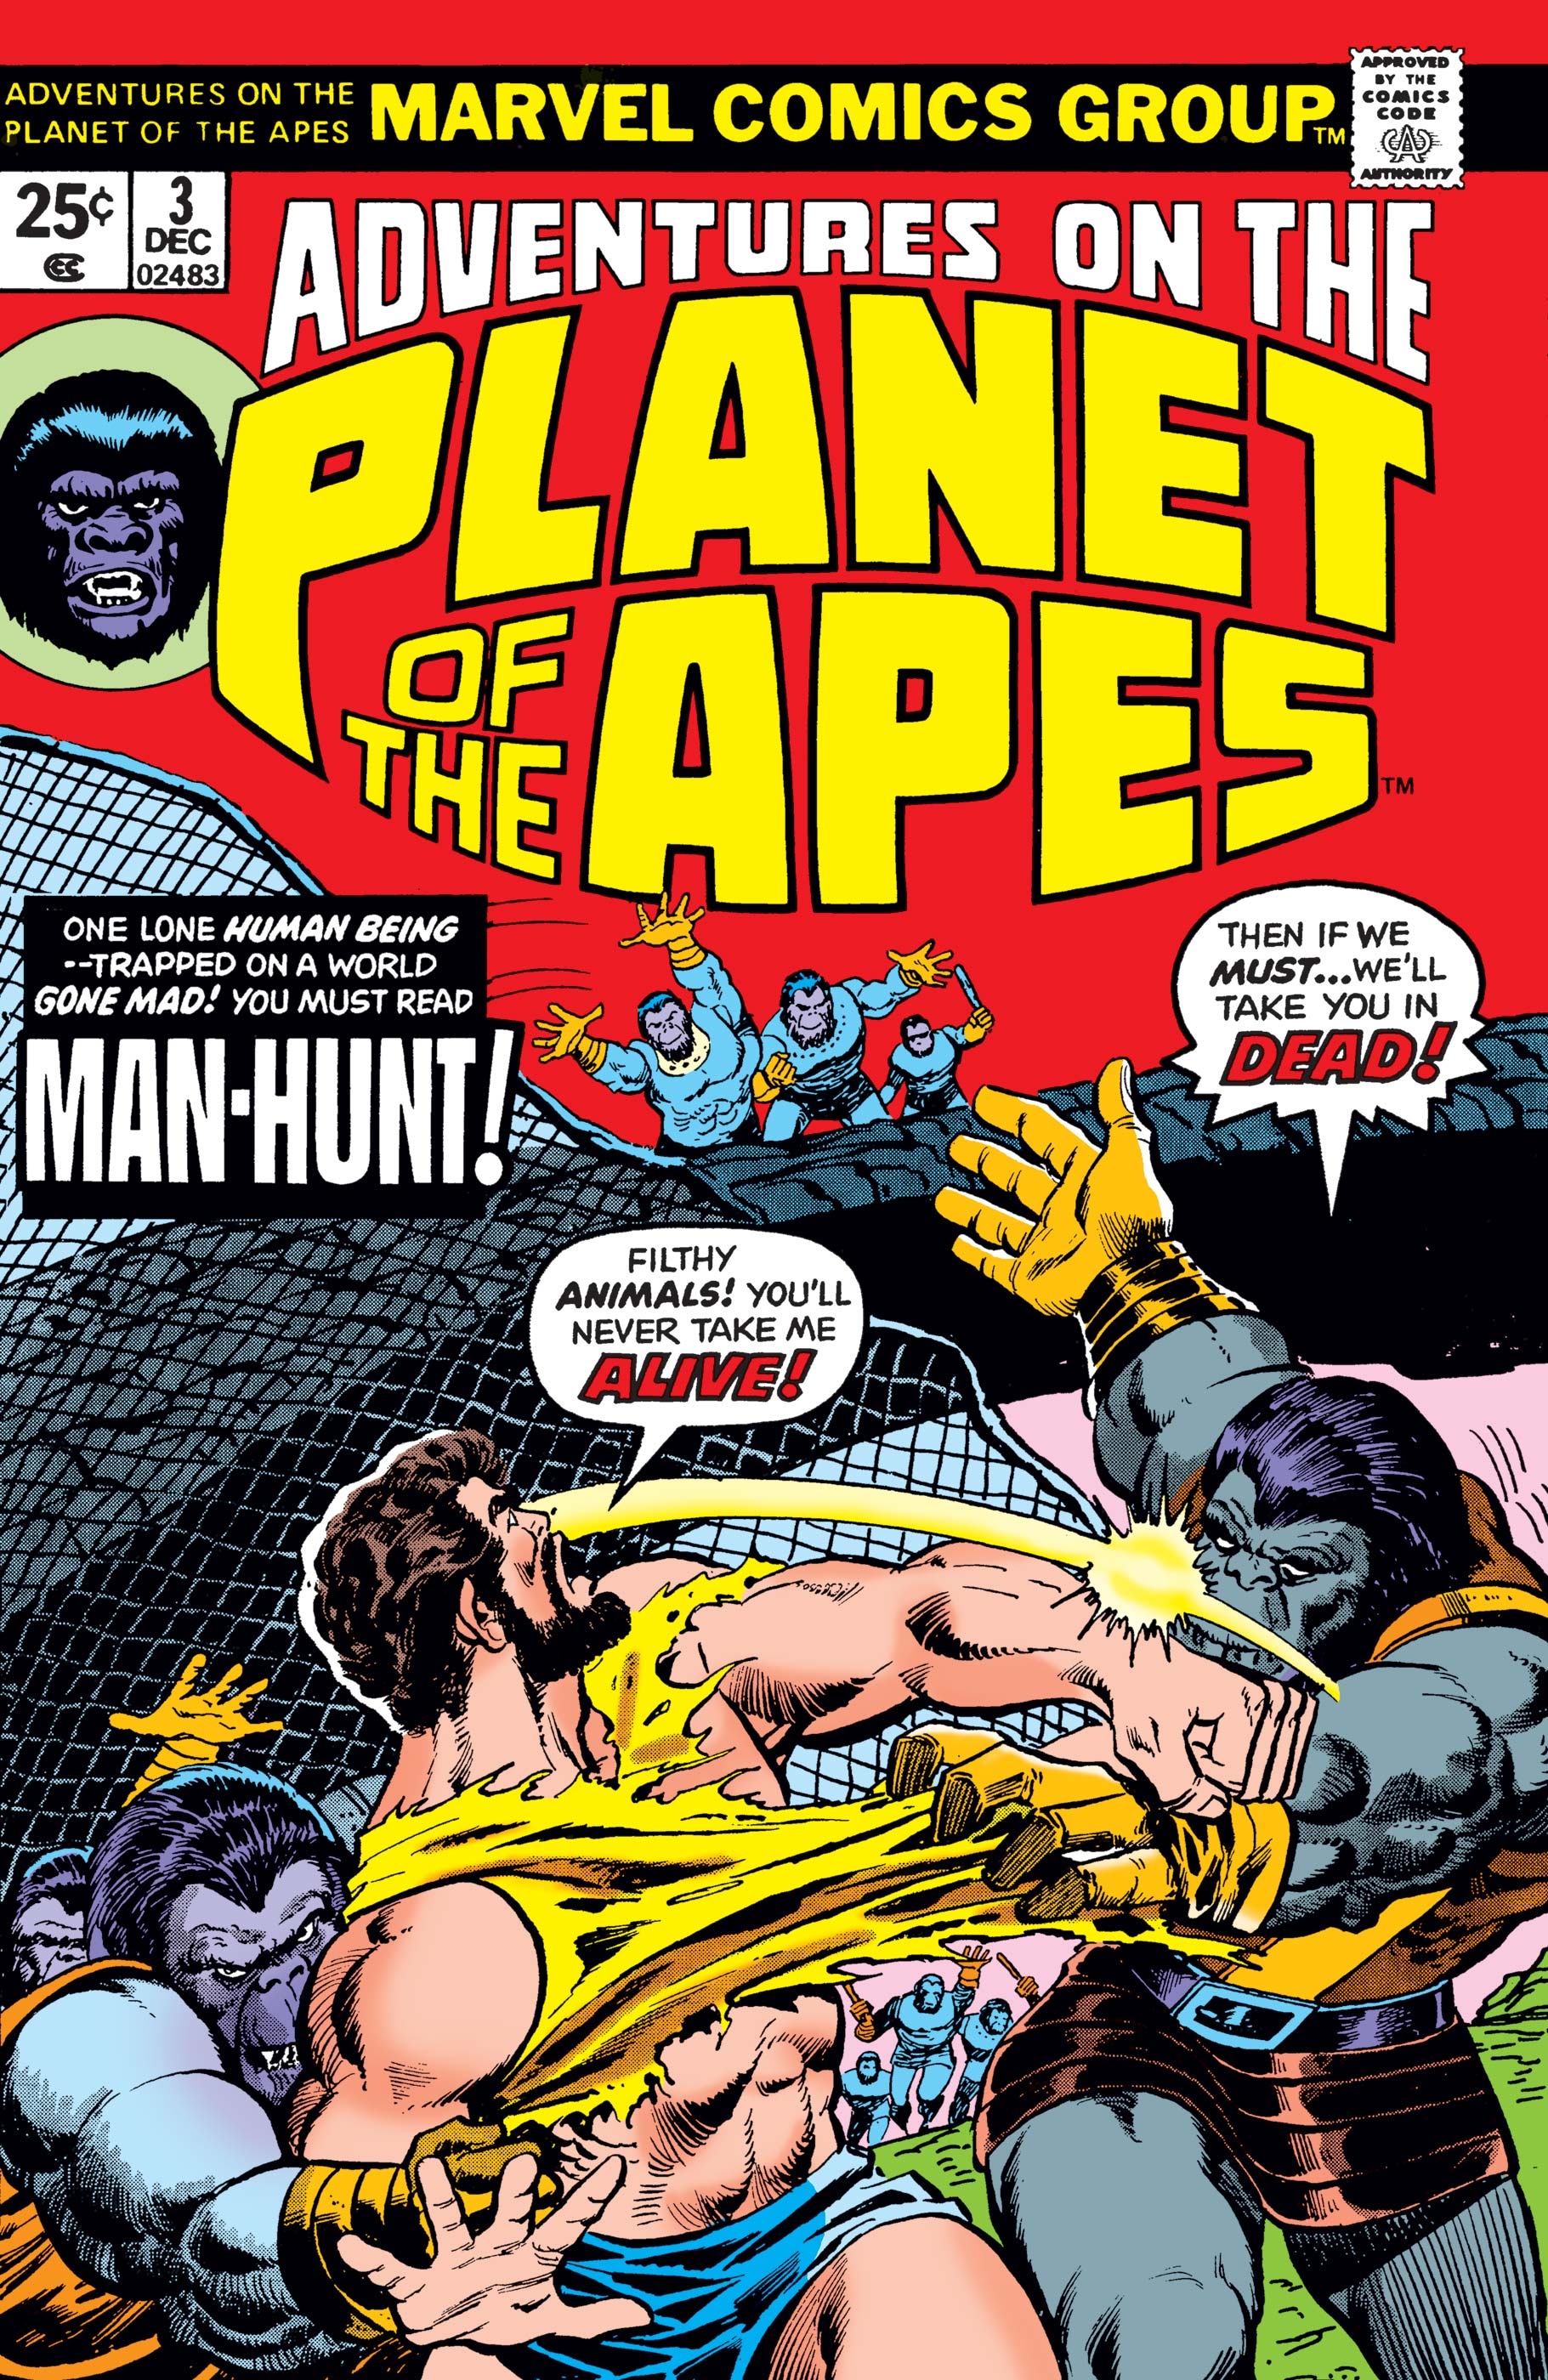 Adventures on the Planet of the Apes (1975) #3